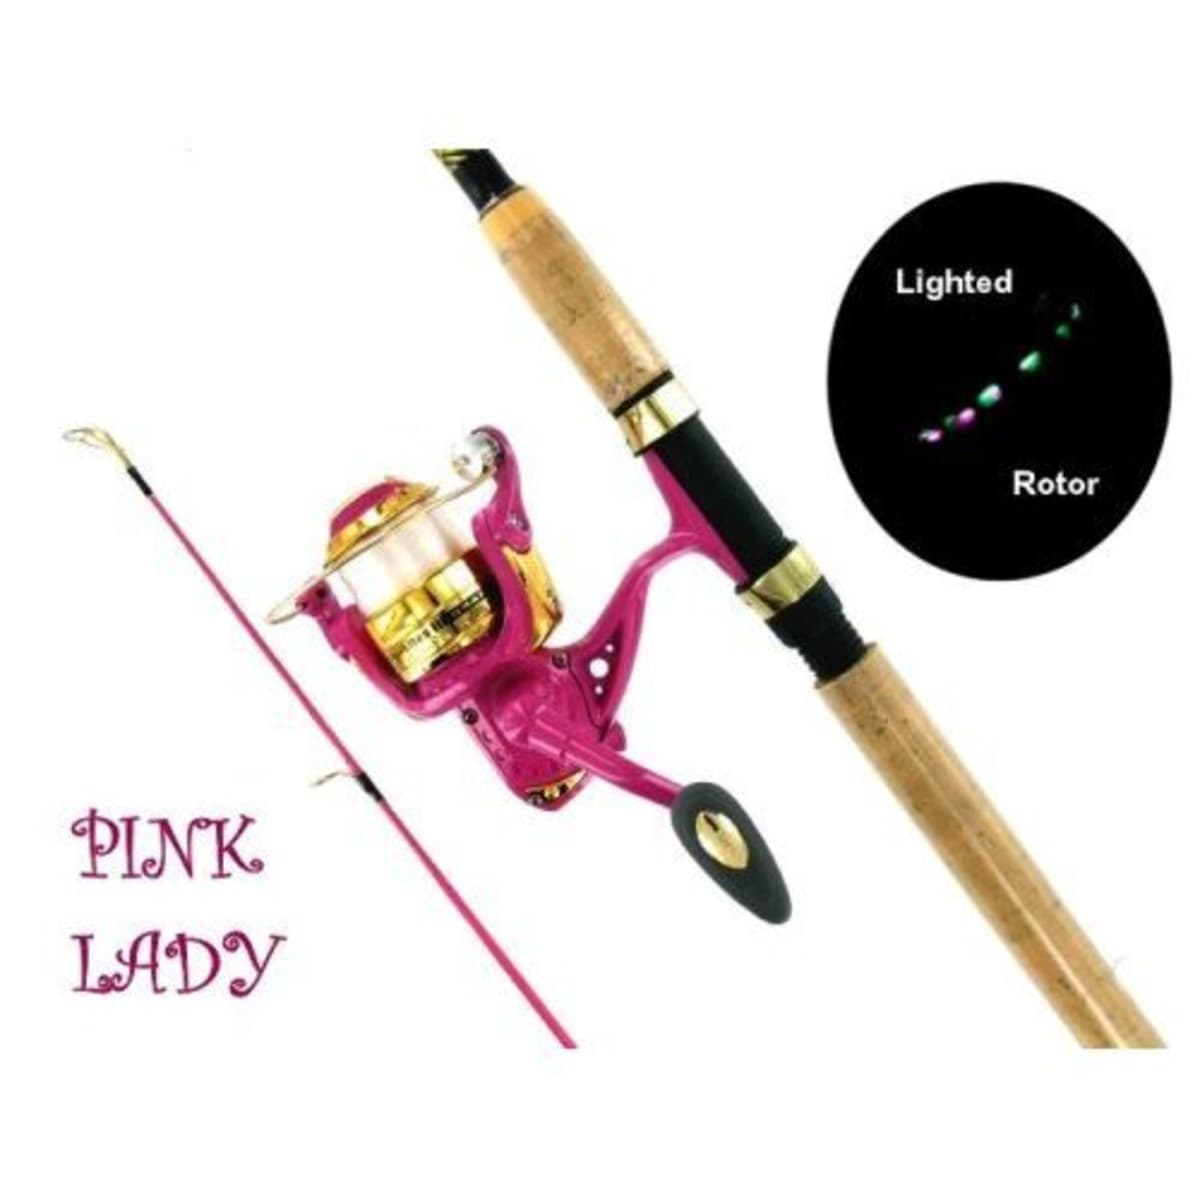 Pink Fishing Rods Really? What girl doesn't love Bling? - HubPages